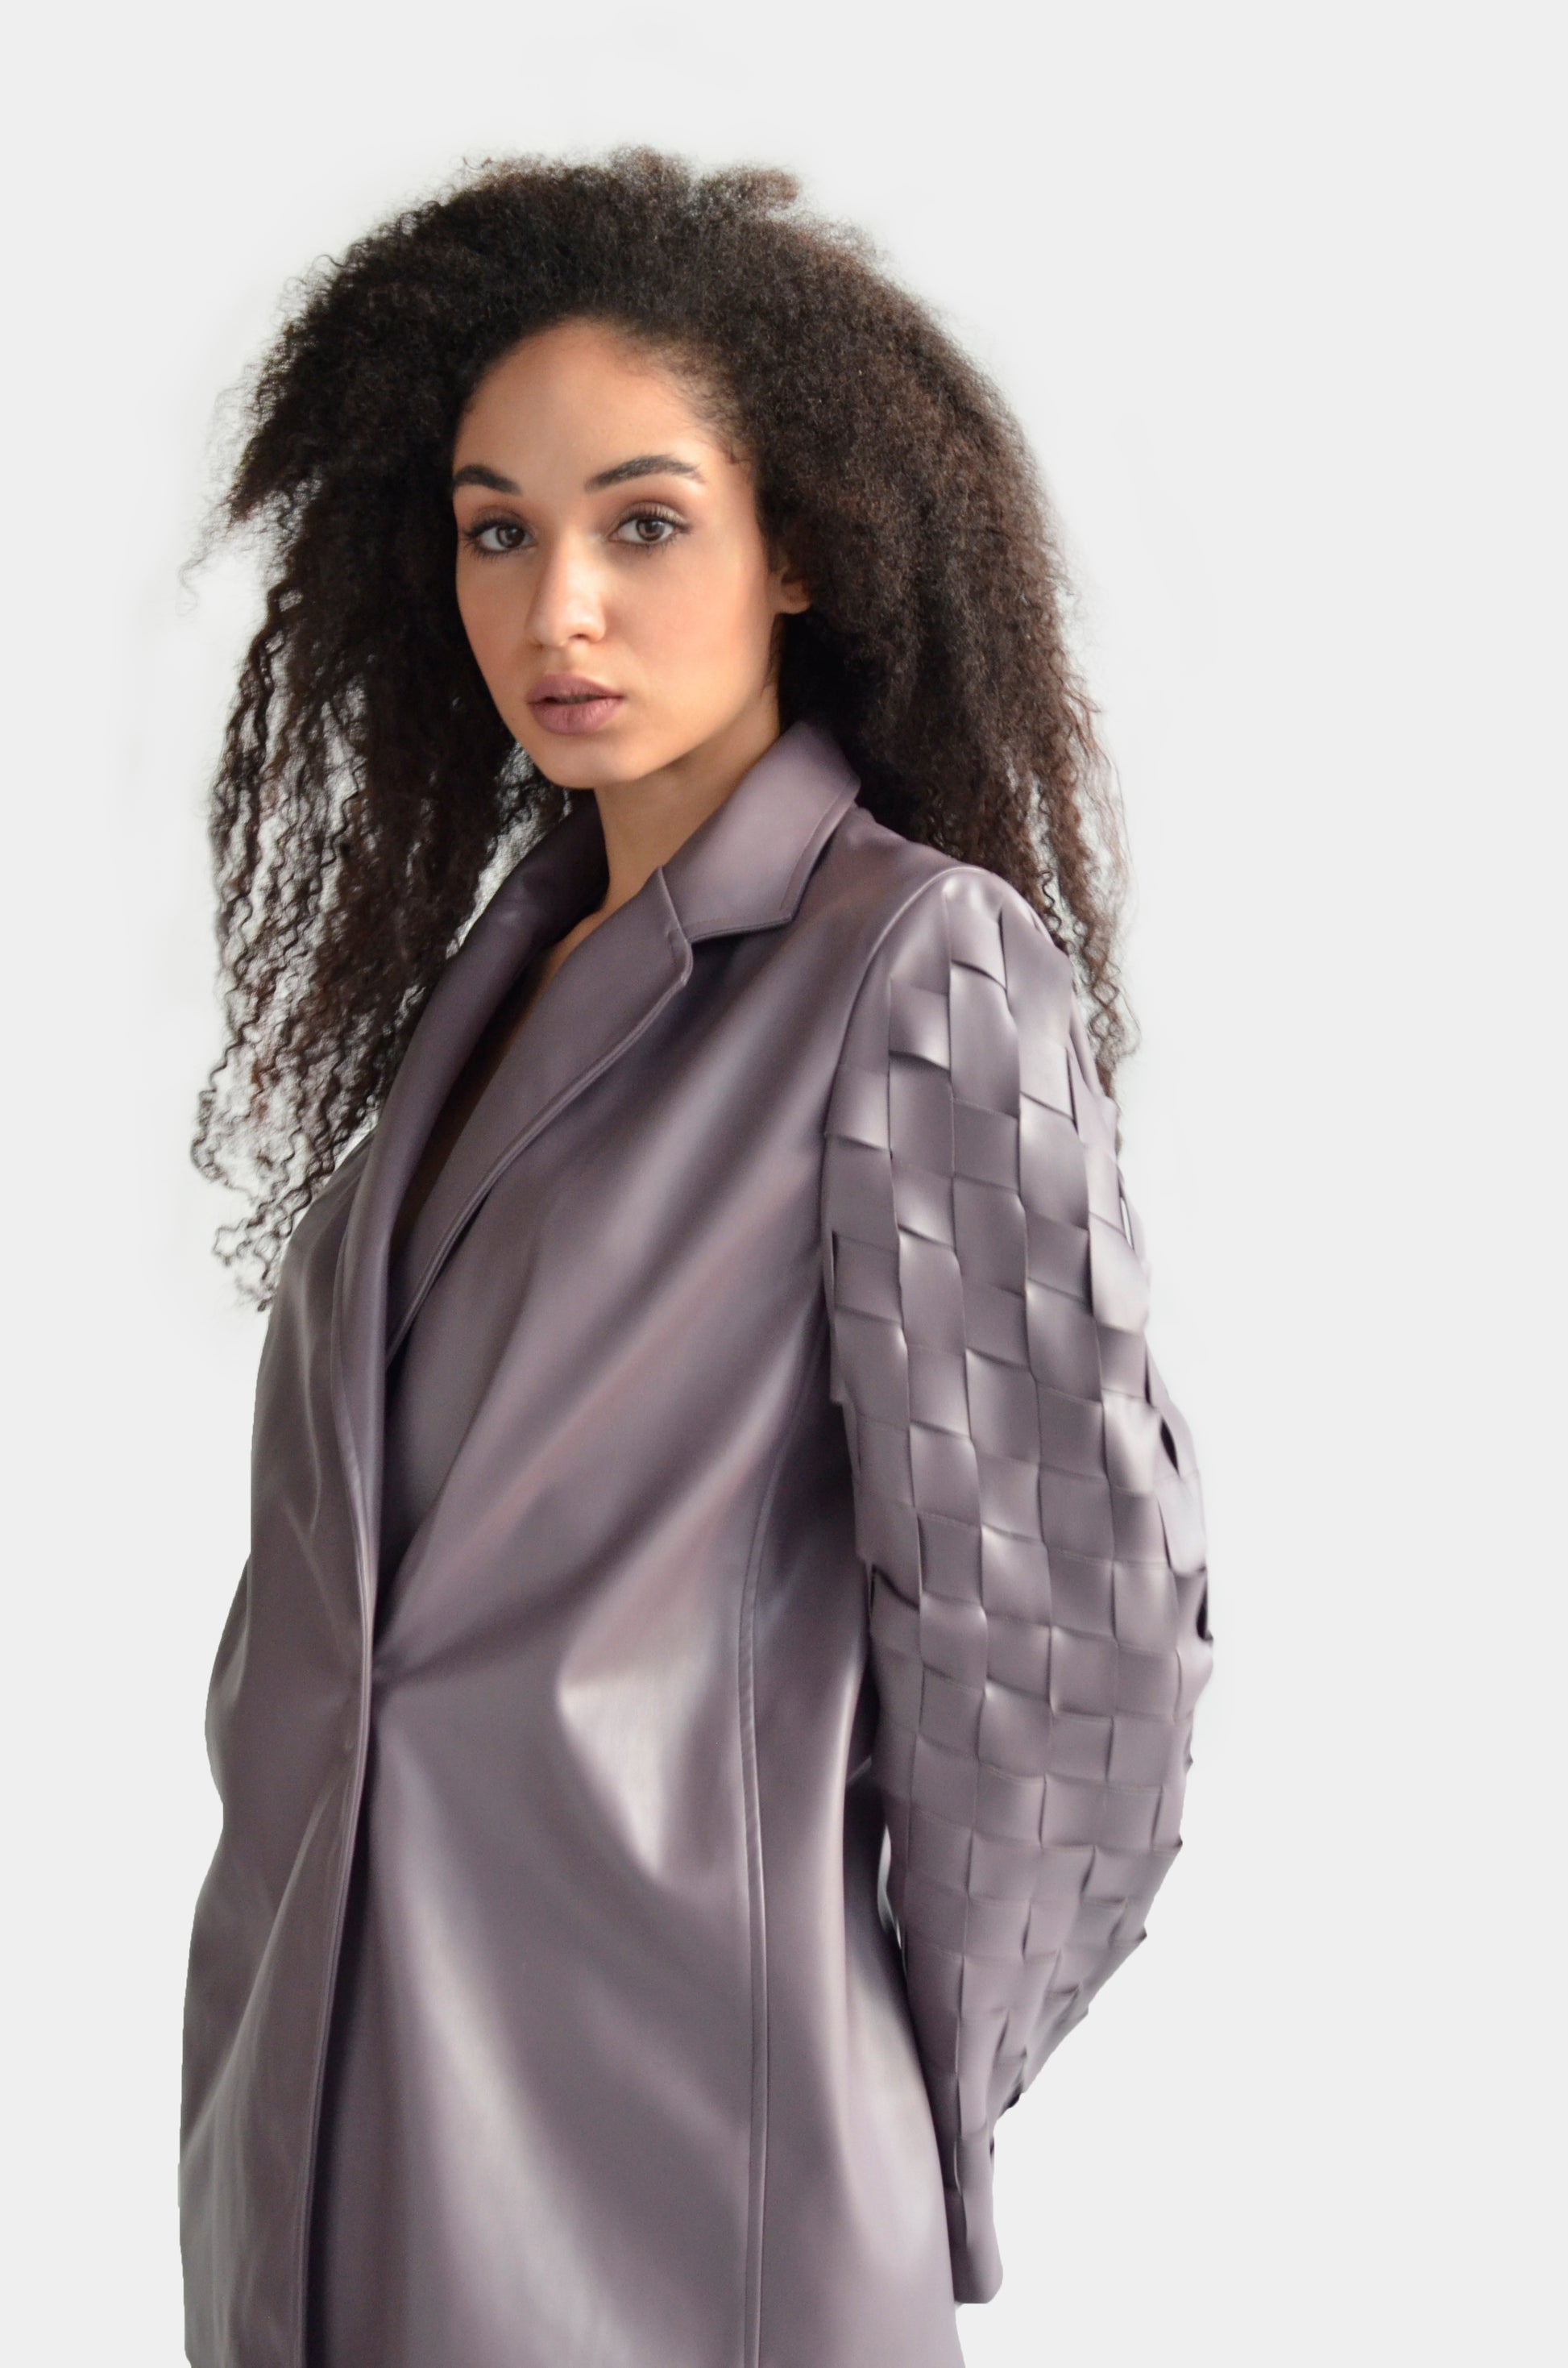 Gray eco leather jacket blazer with weaving detail for women by Holocene